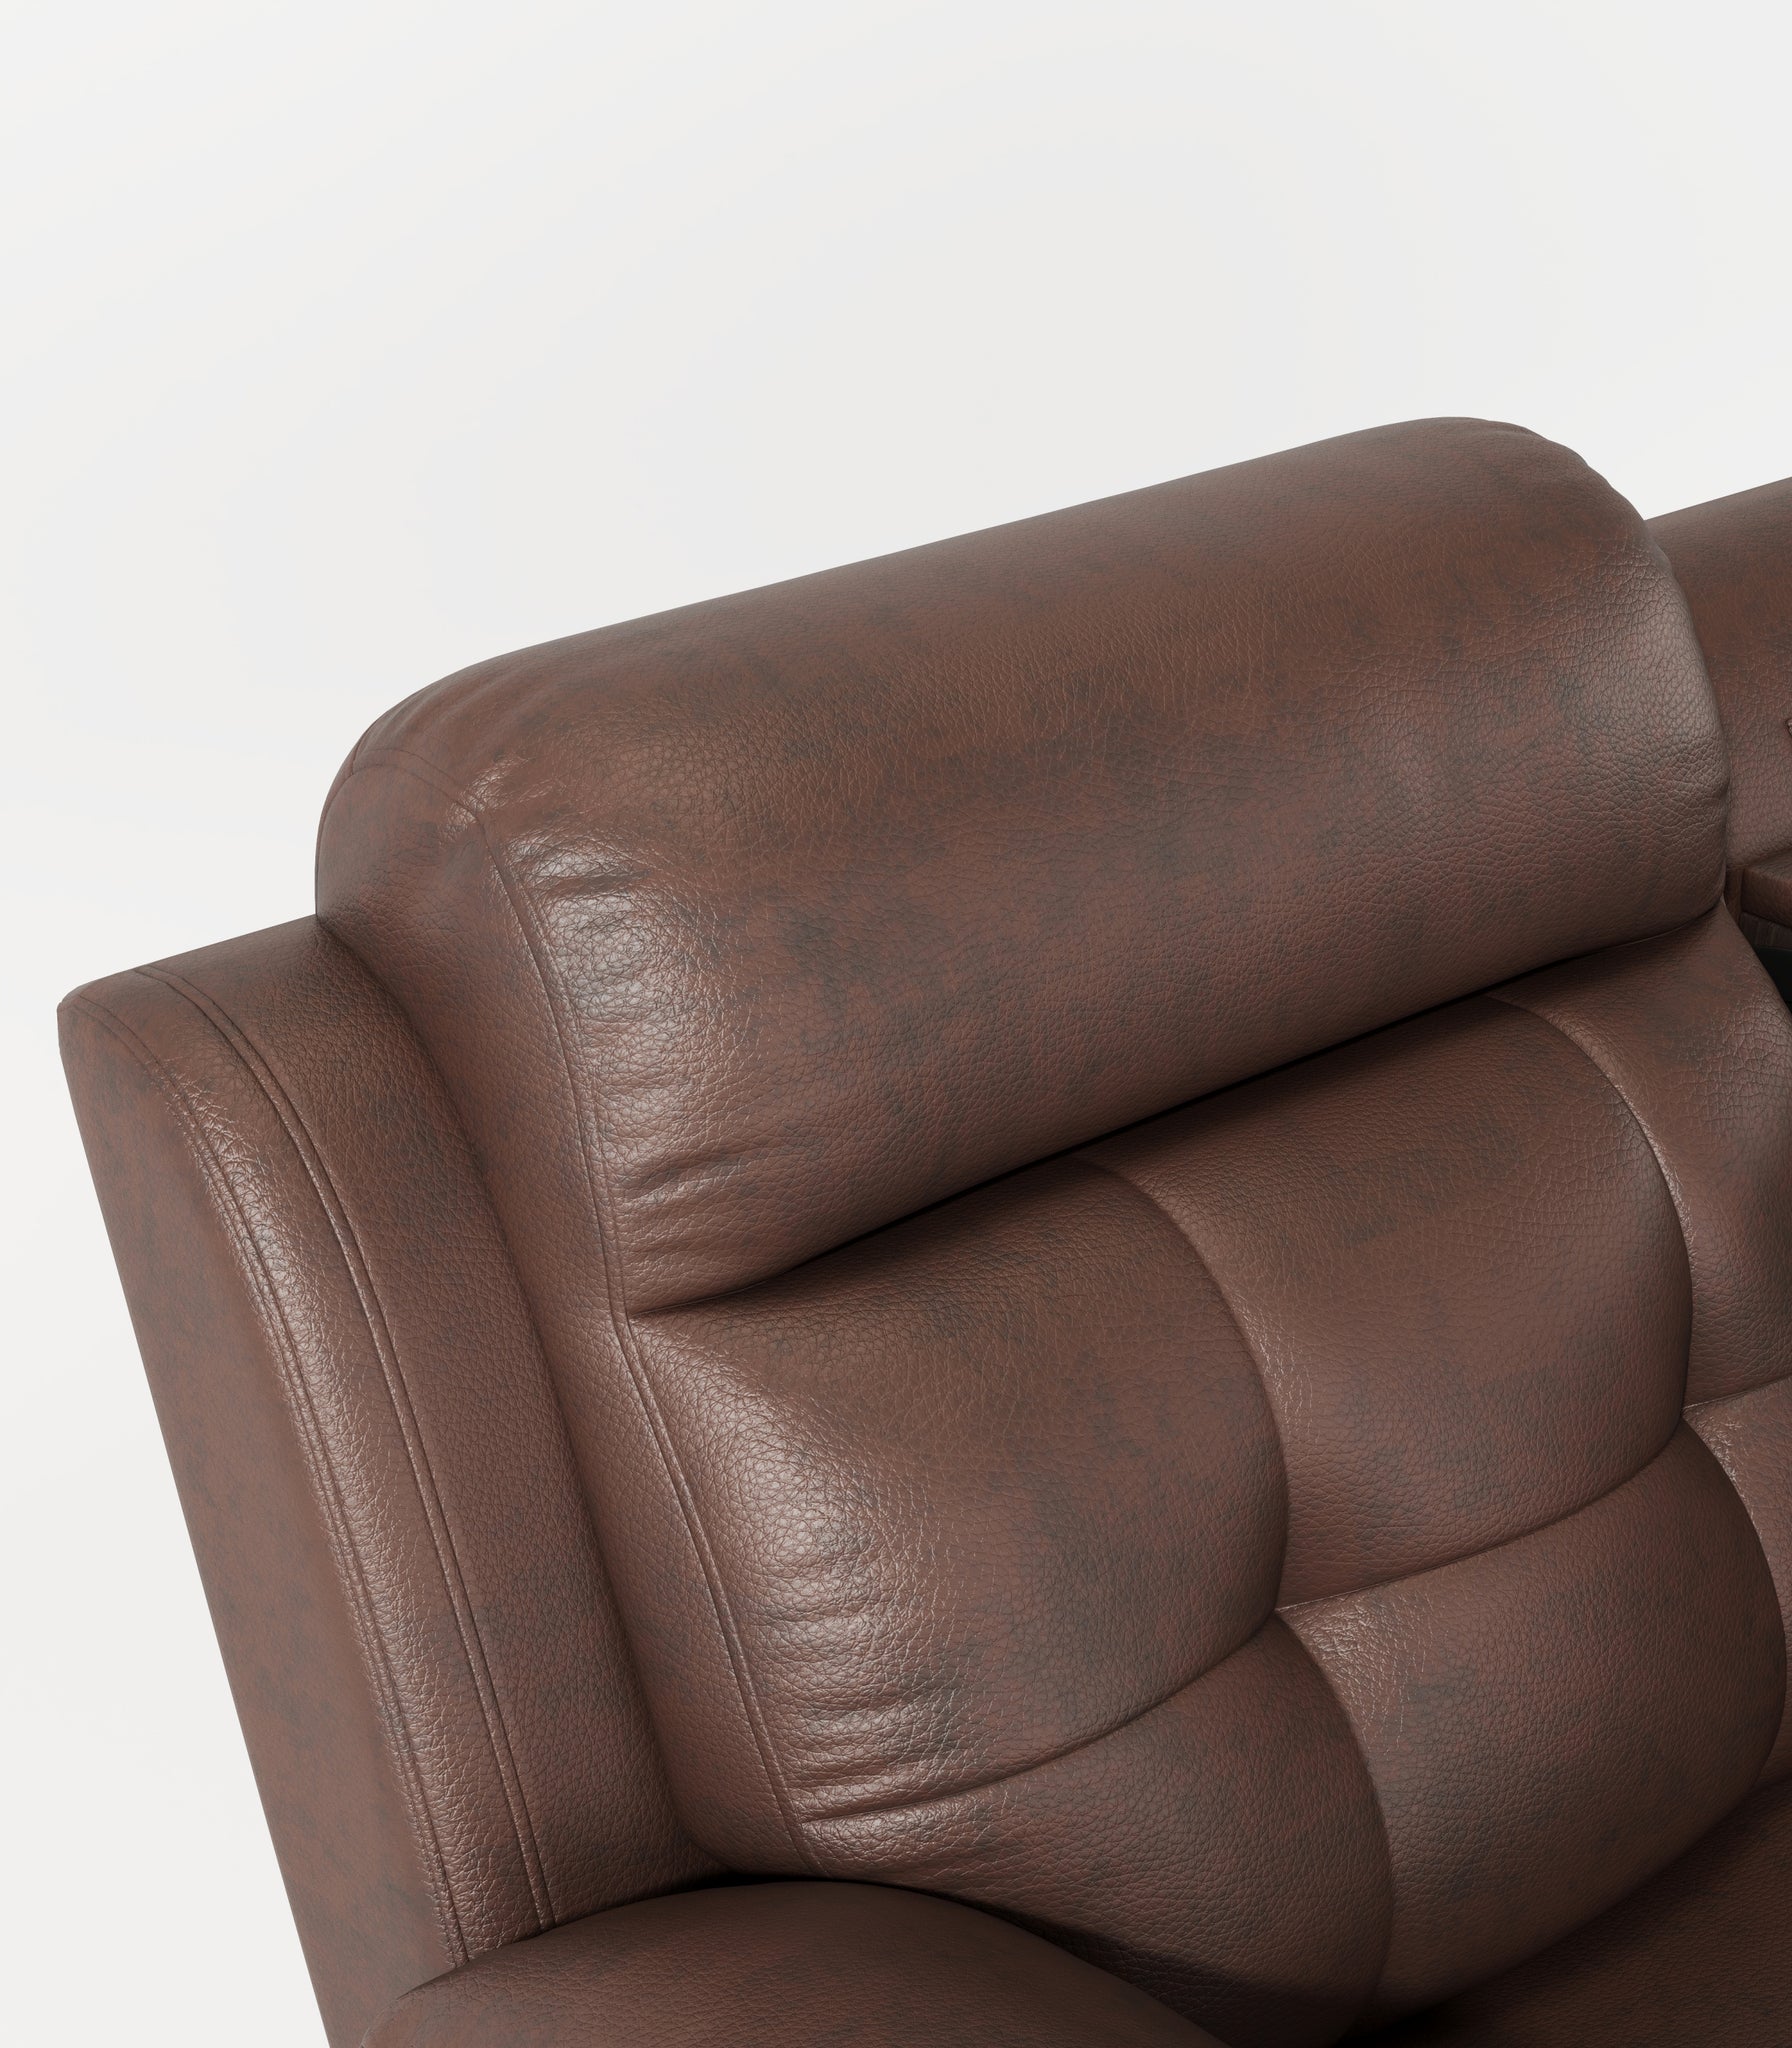 Genuine Leather Non Power Reclining Sofa with Drop brown-primary living space-american